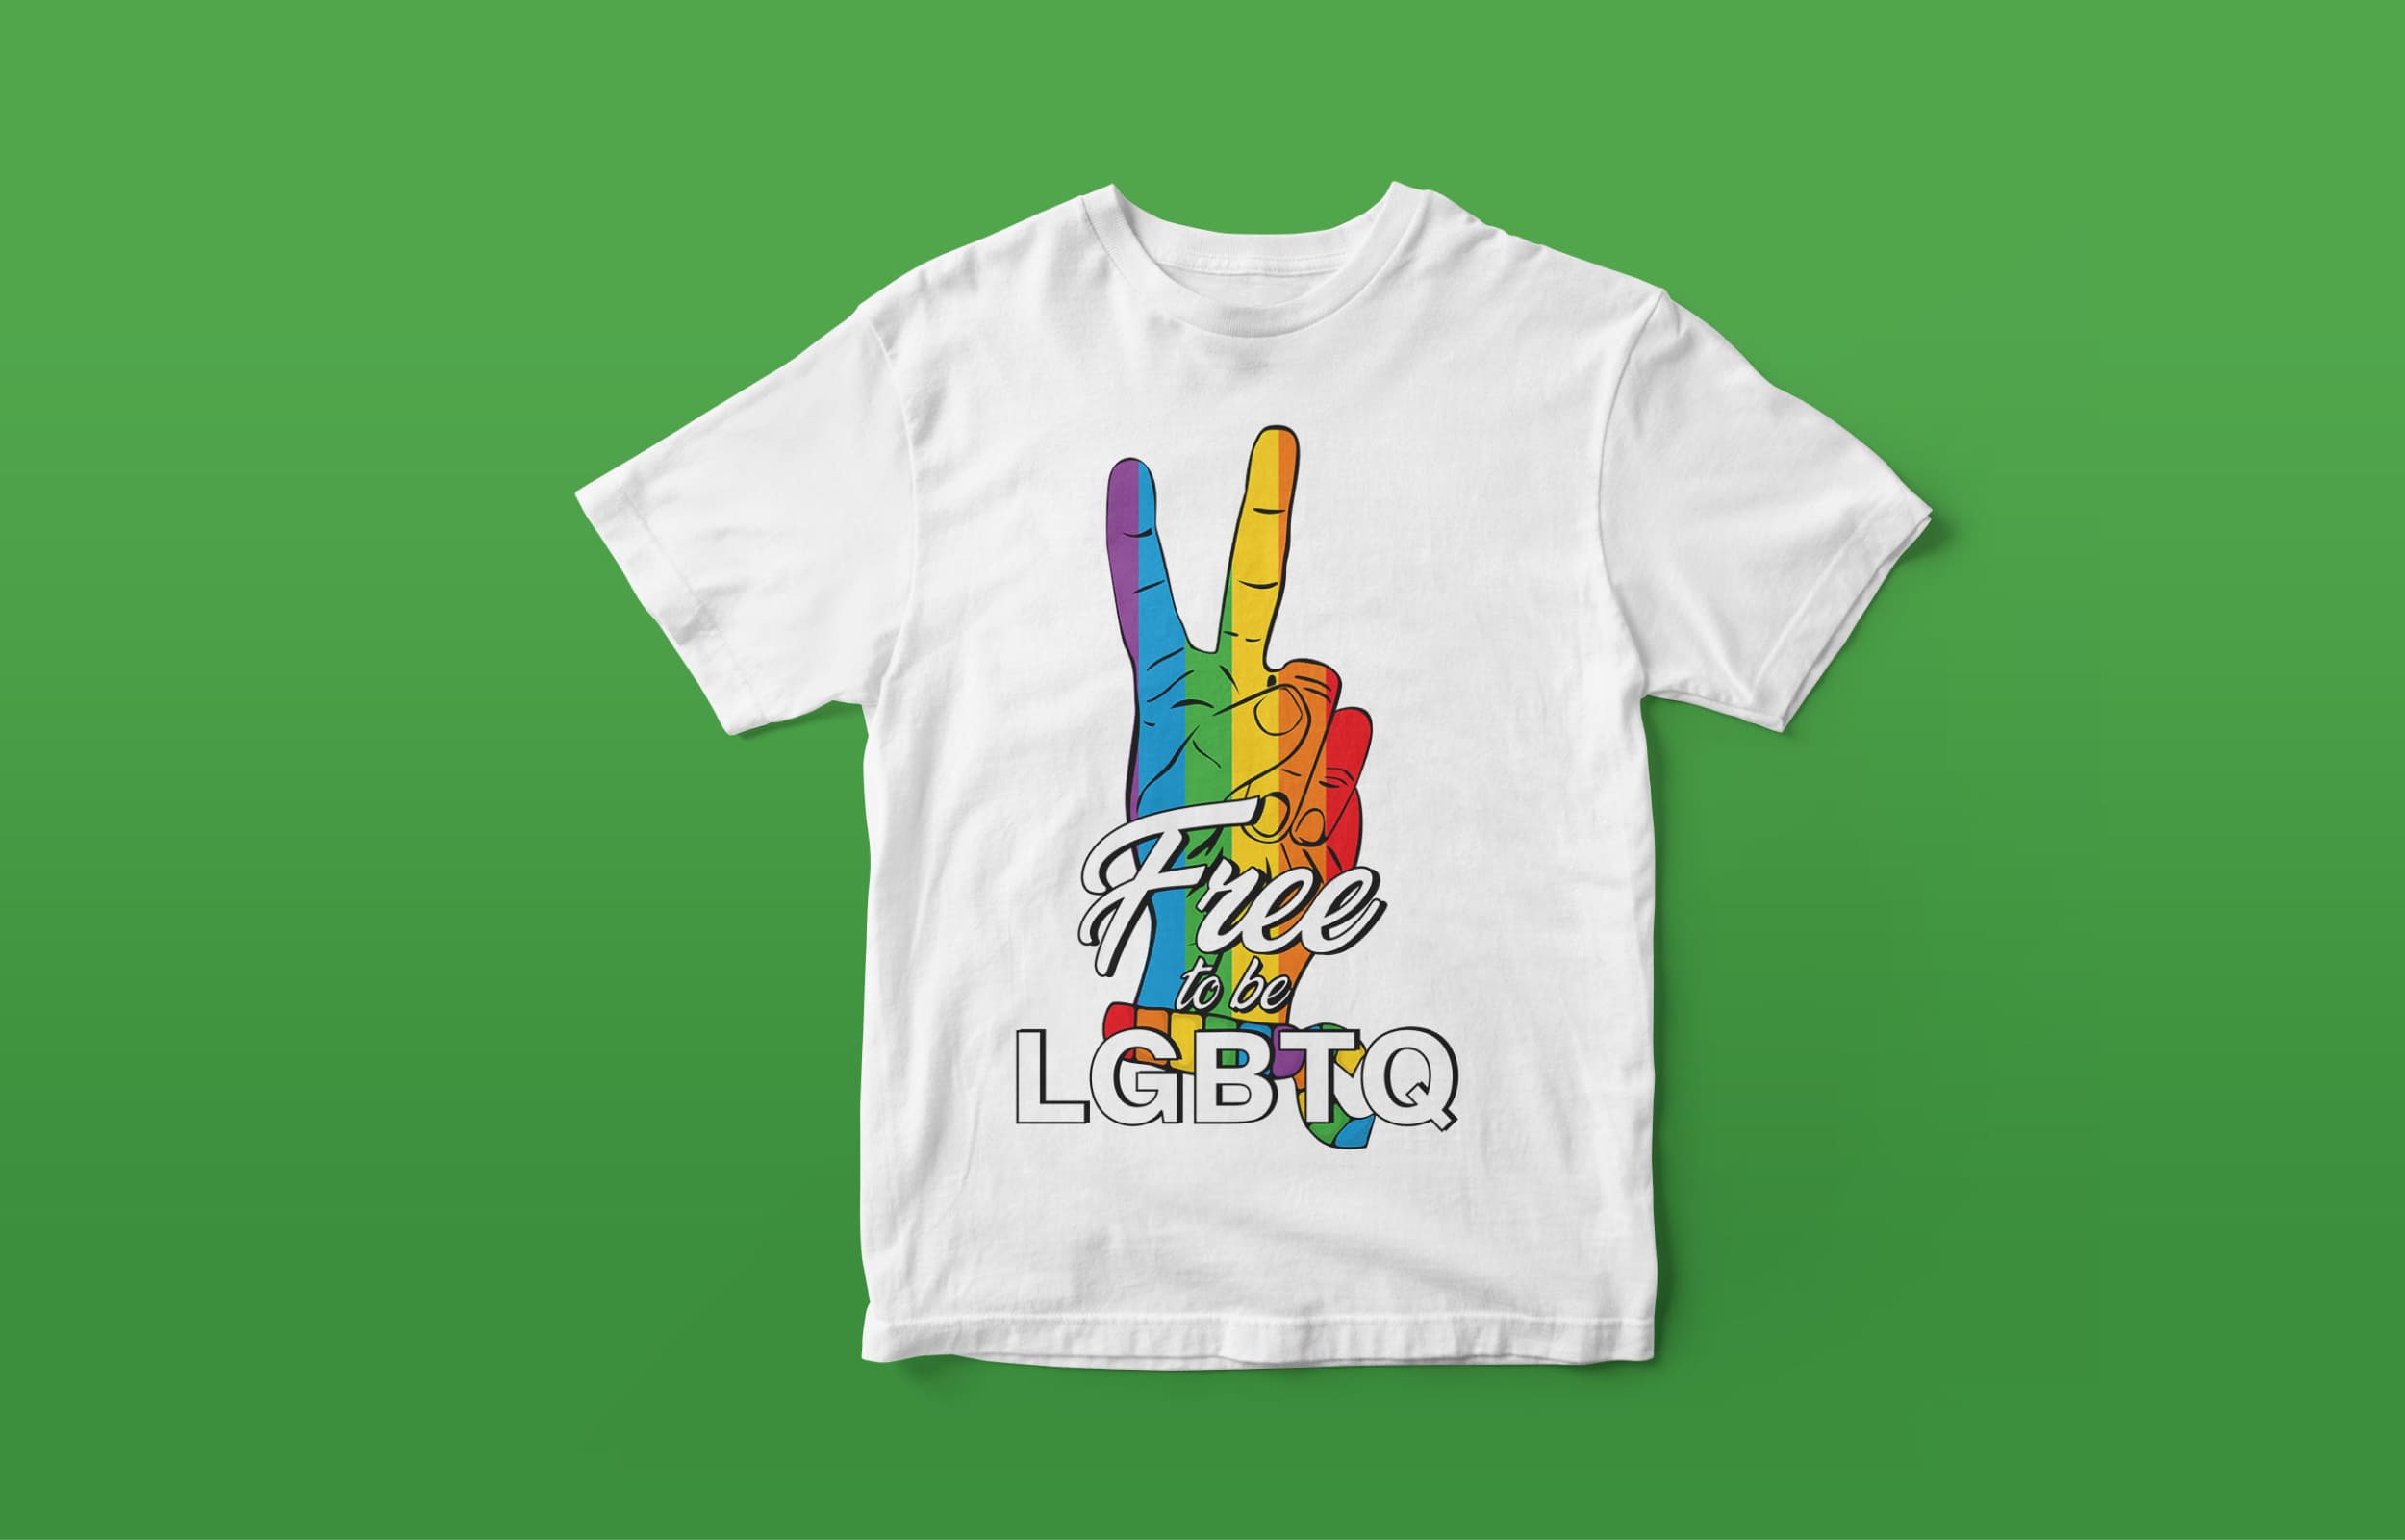 White t-shirt with а peace hand sign in the colors of the LGBT flag and the white lettering "Free to be LGBTQ" on a green background.